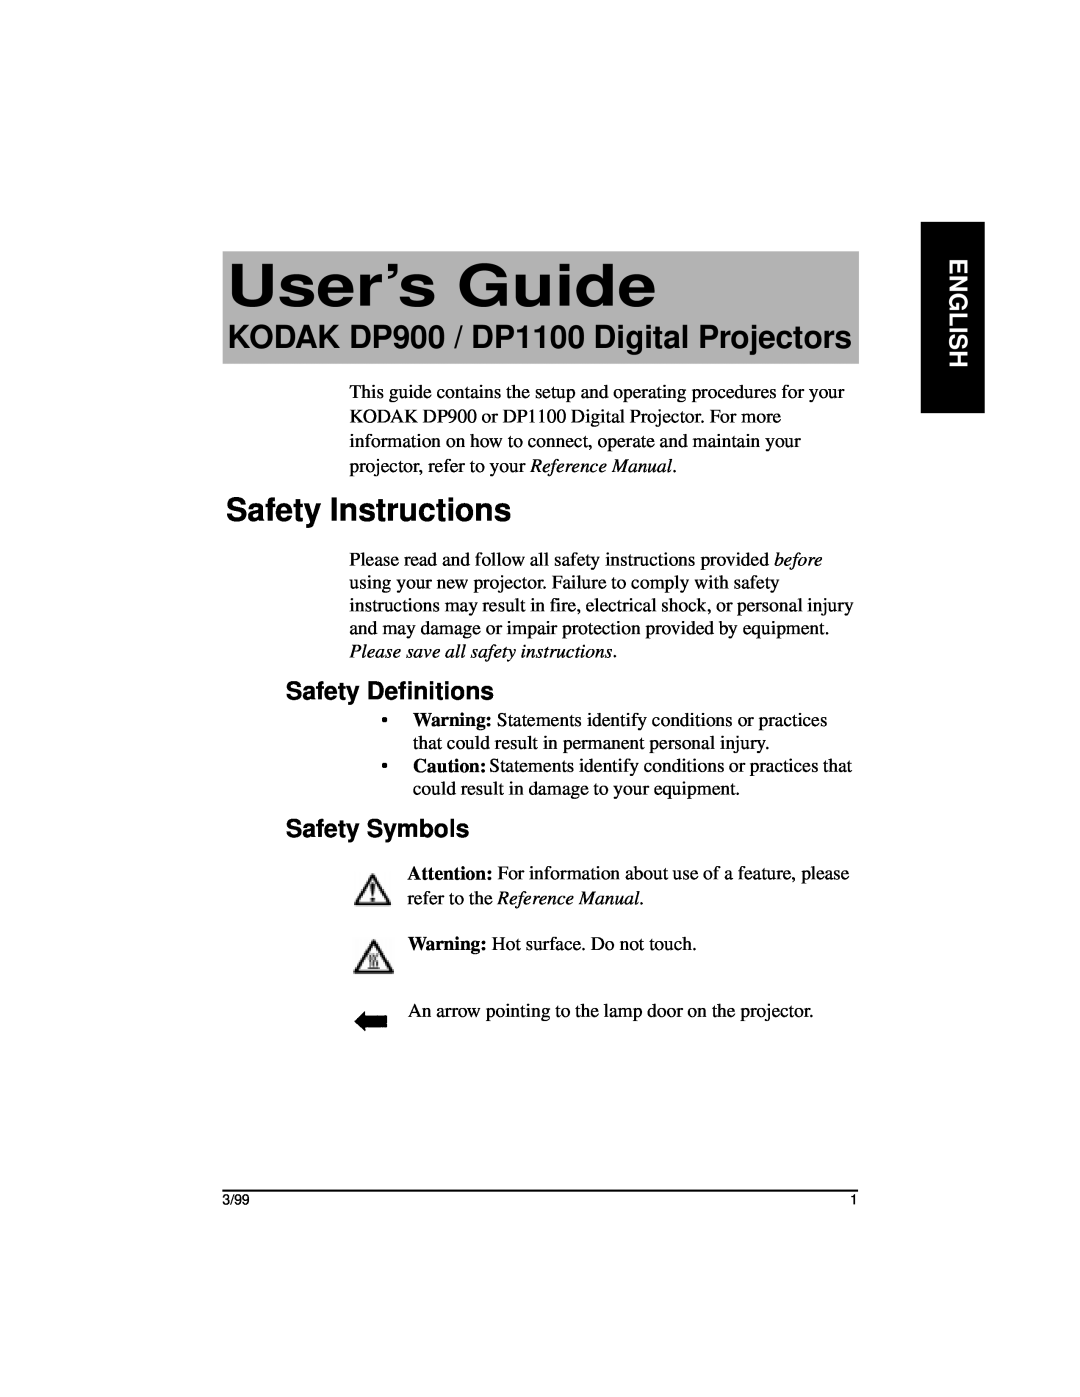 Kodak DP1100, DP900 manual Safety Instructions, Safety Definitions, Safety Symbols, User’s Guide, English 